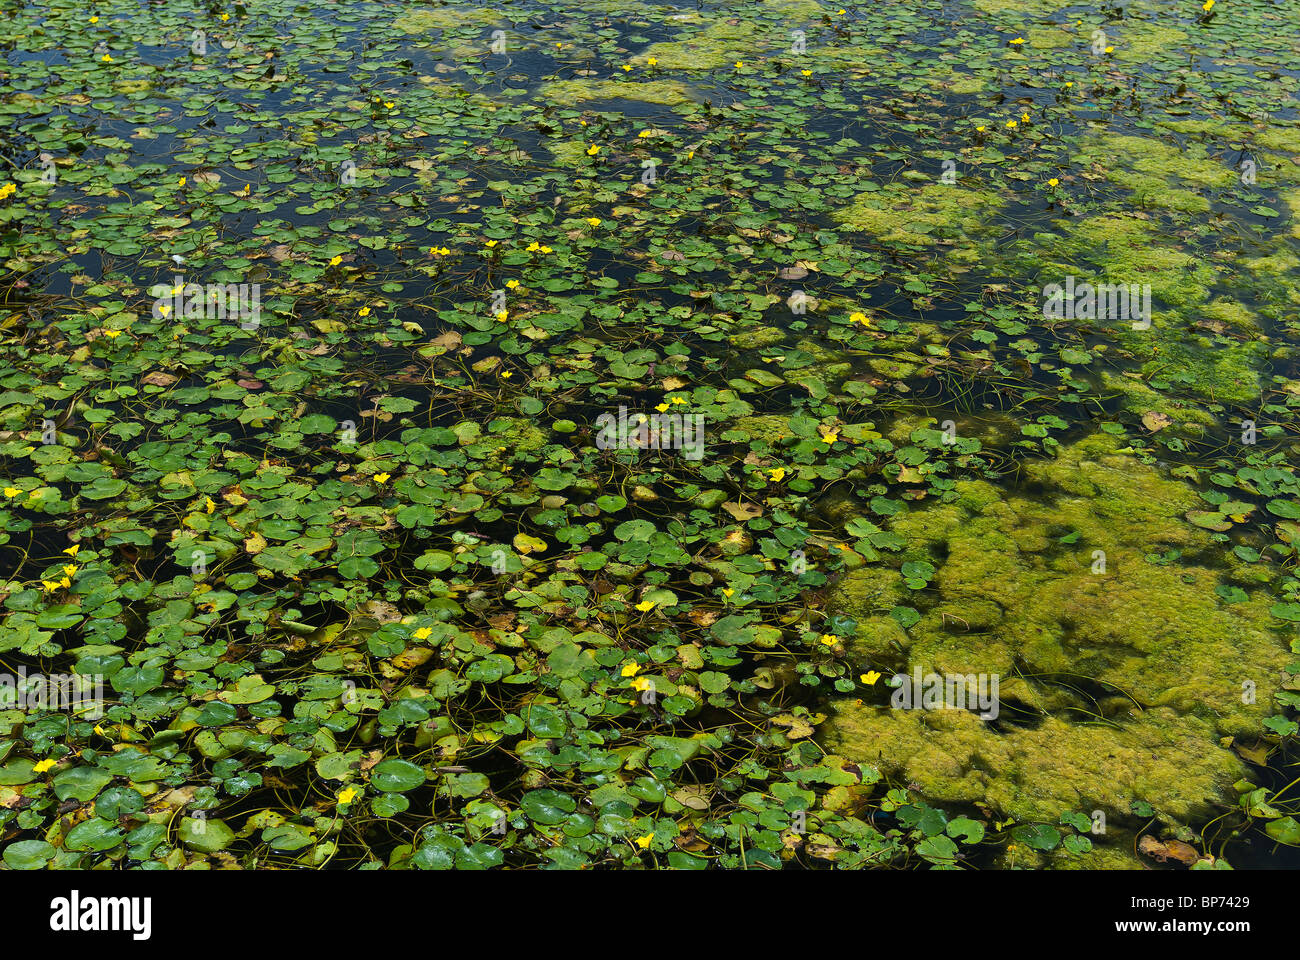 Floating heart, fringed water lily, yellow floatingheart. Stock Photo